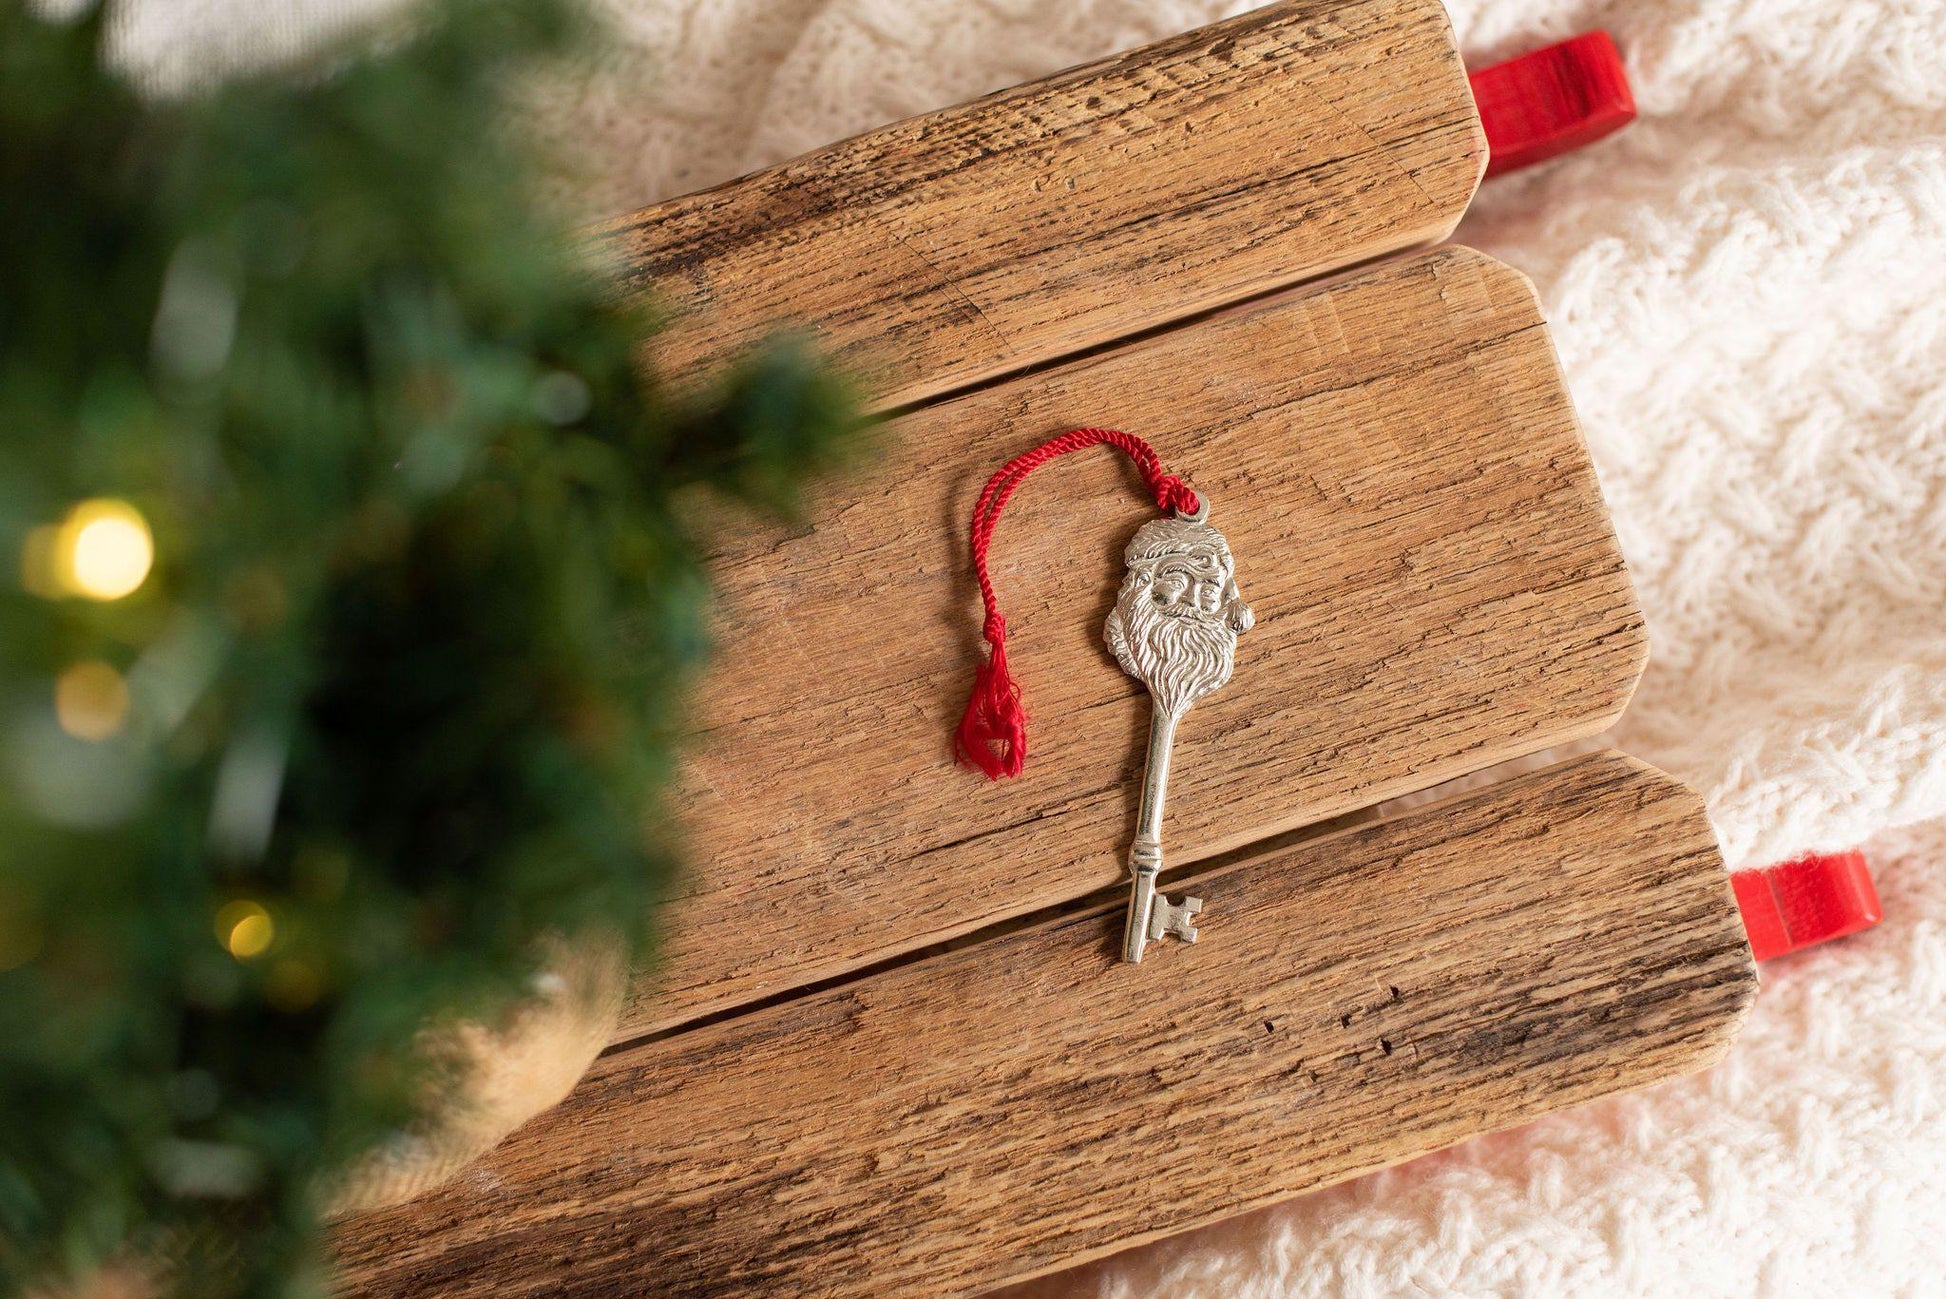 Santa's Key For House With No Chimney Ornament, Christmas Ornament